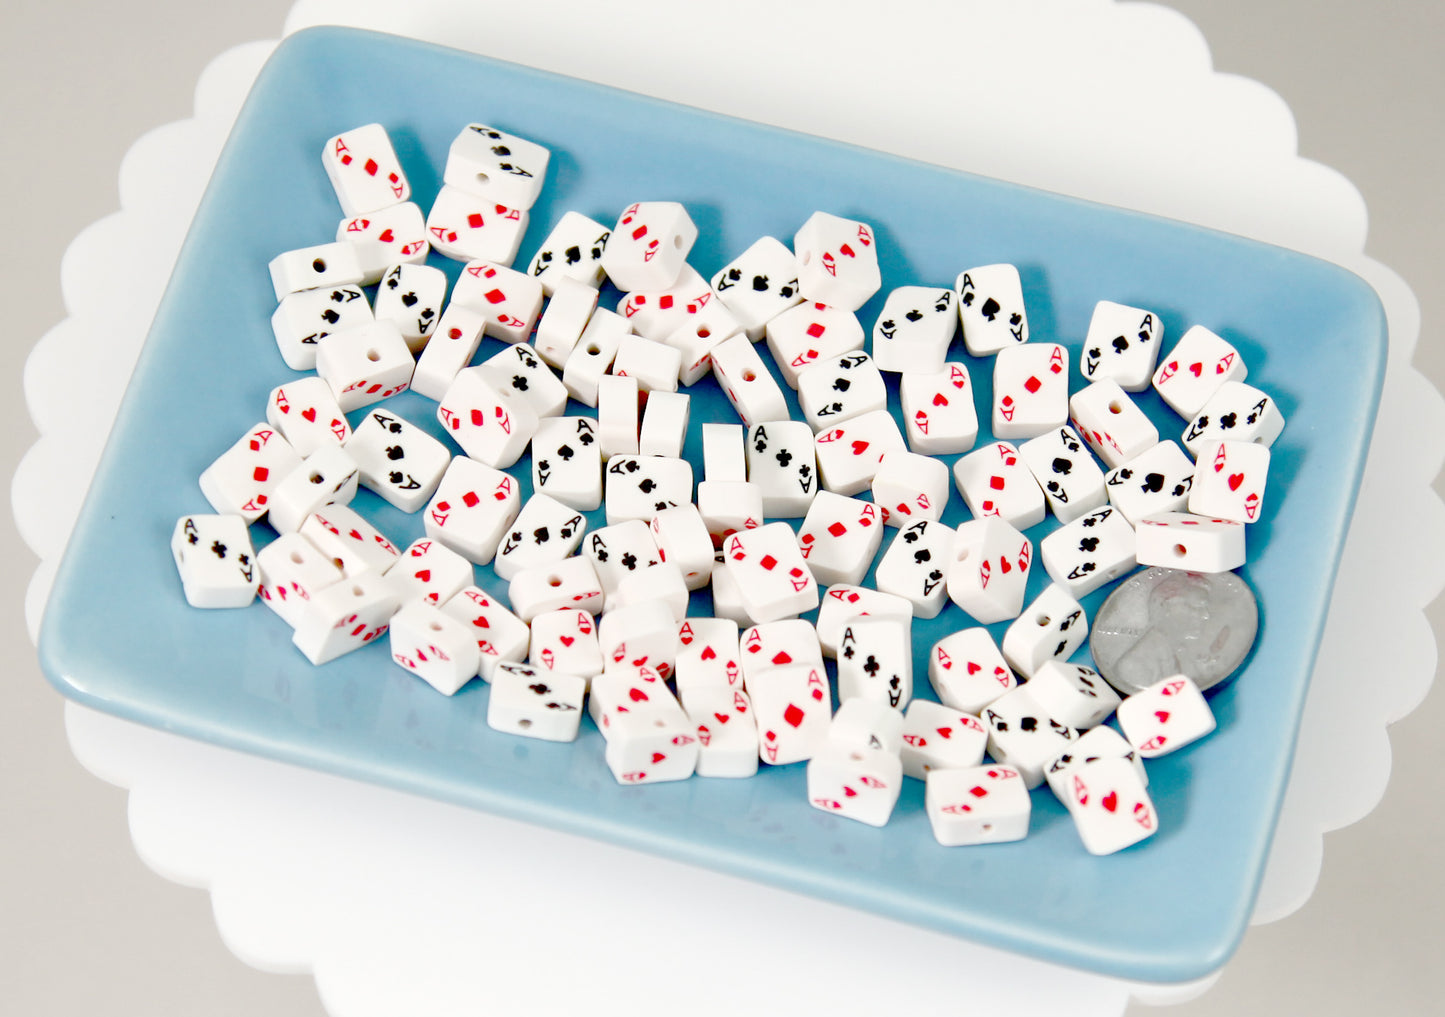 Playing Card Beads - 9mm Ace Card Suit Shape Poker Bead Fimo or Polymer Clay Beads - 50 pc set